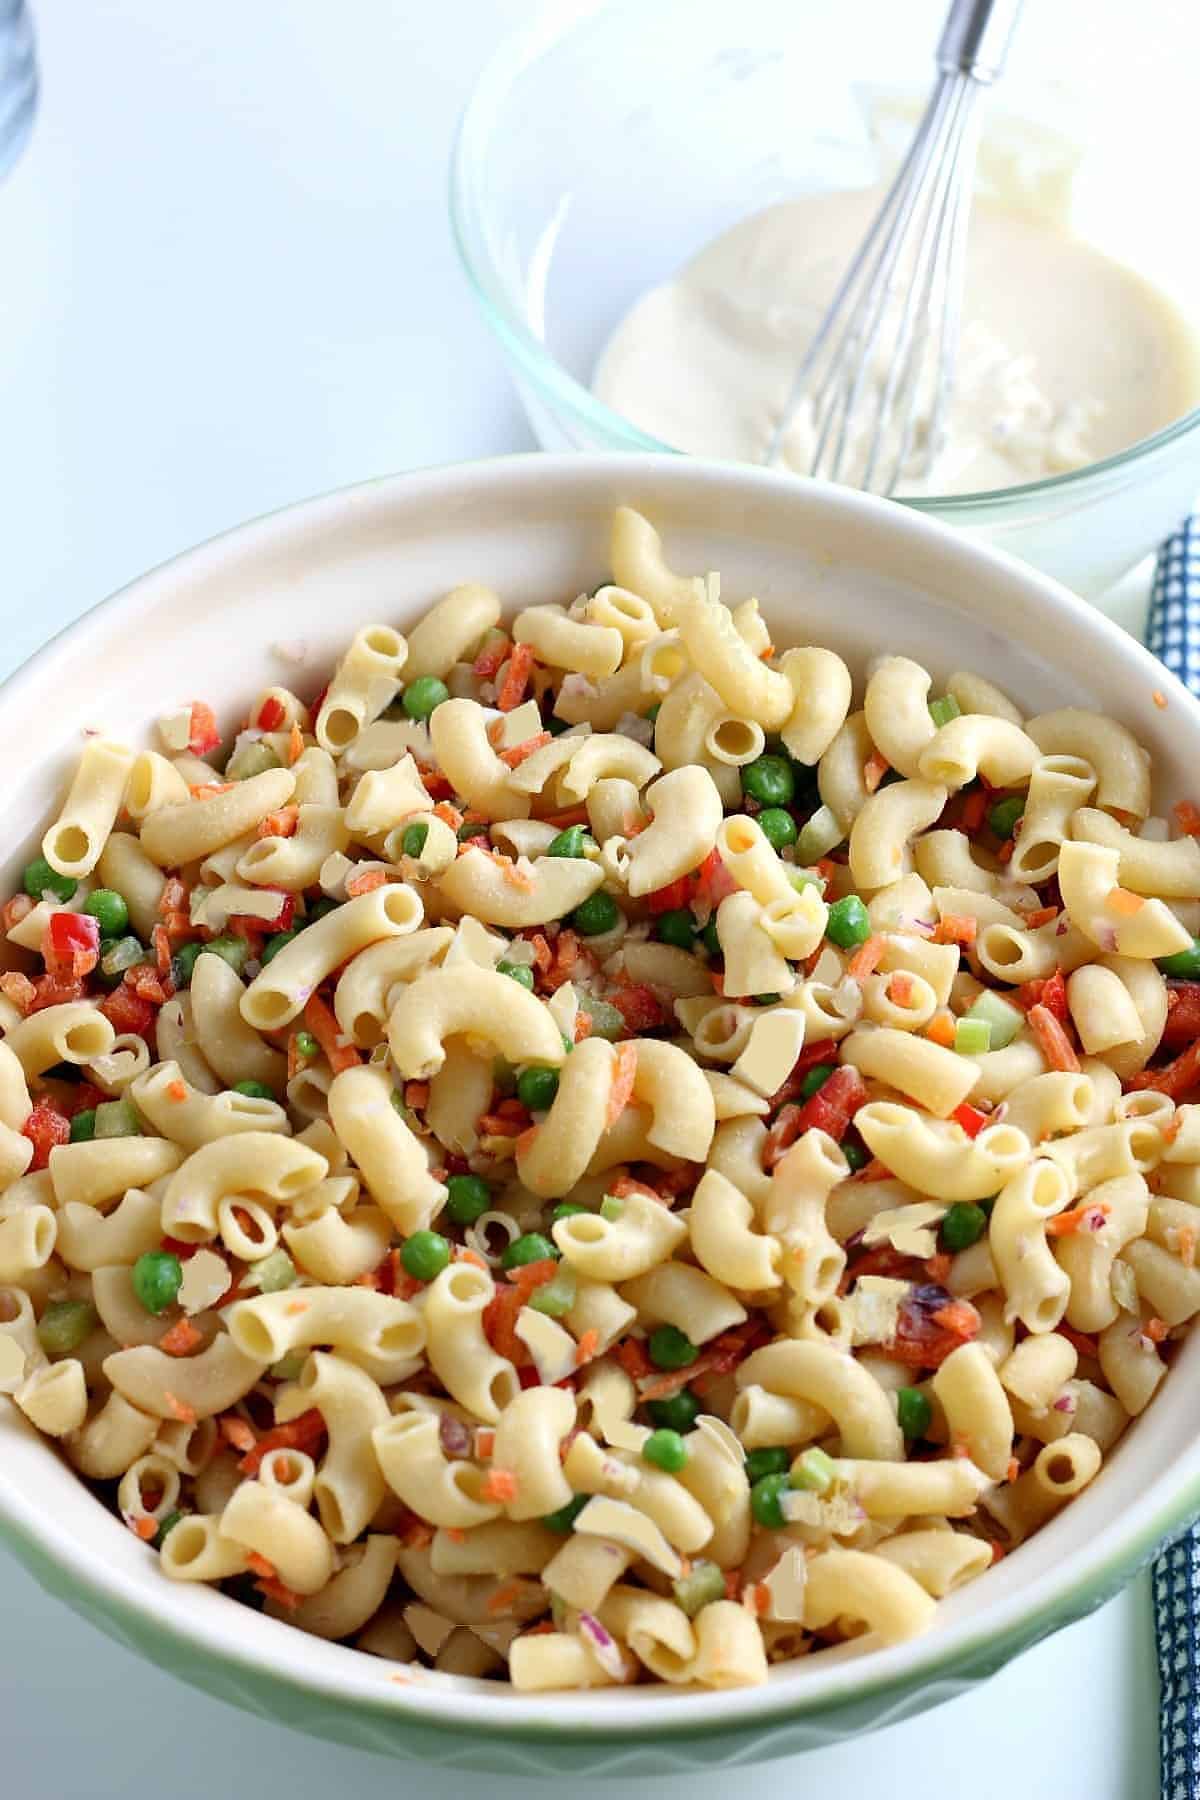 A large bowl full of old fashioned macaroni salad and small chopped veggies waiting to be tossed with the creamy dressing in a bowl that's in the background.